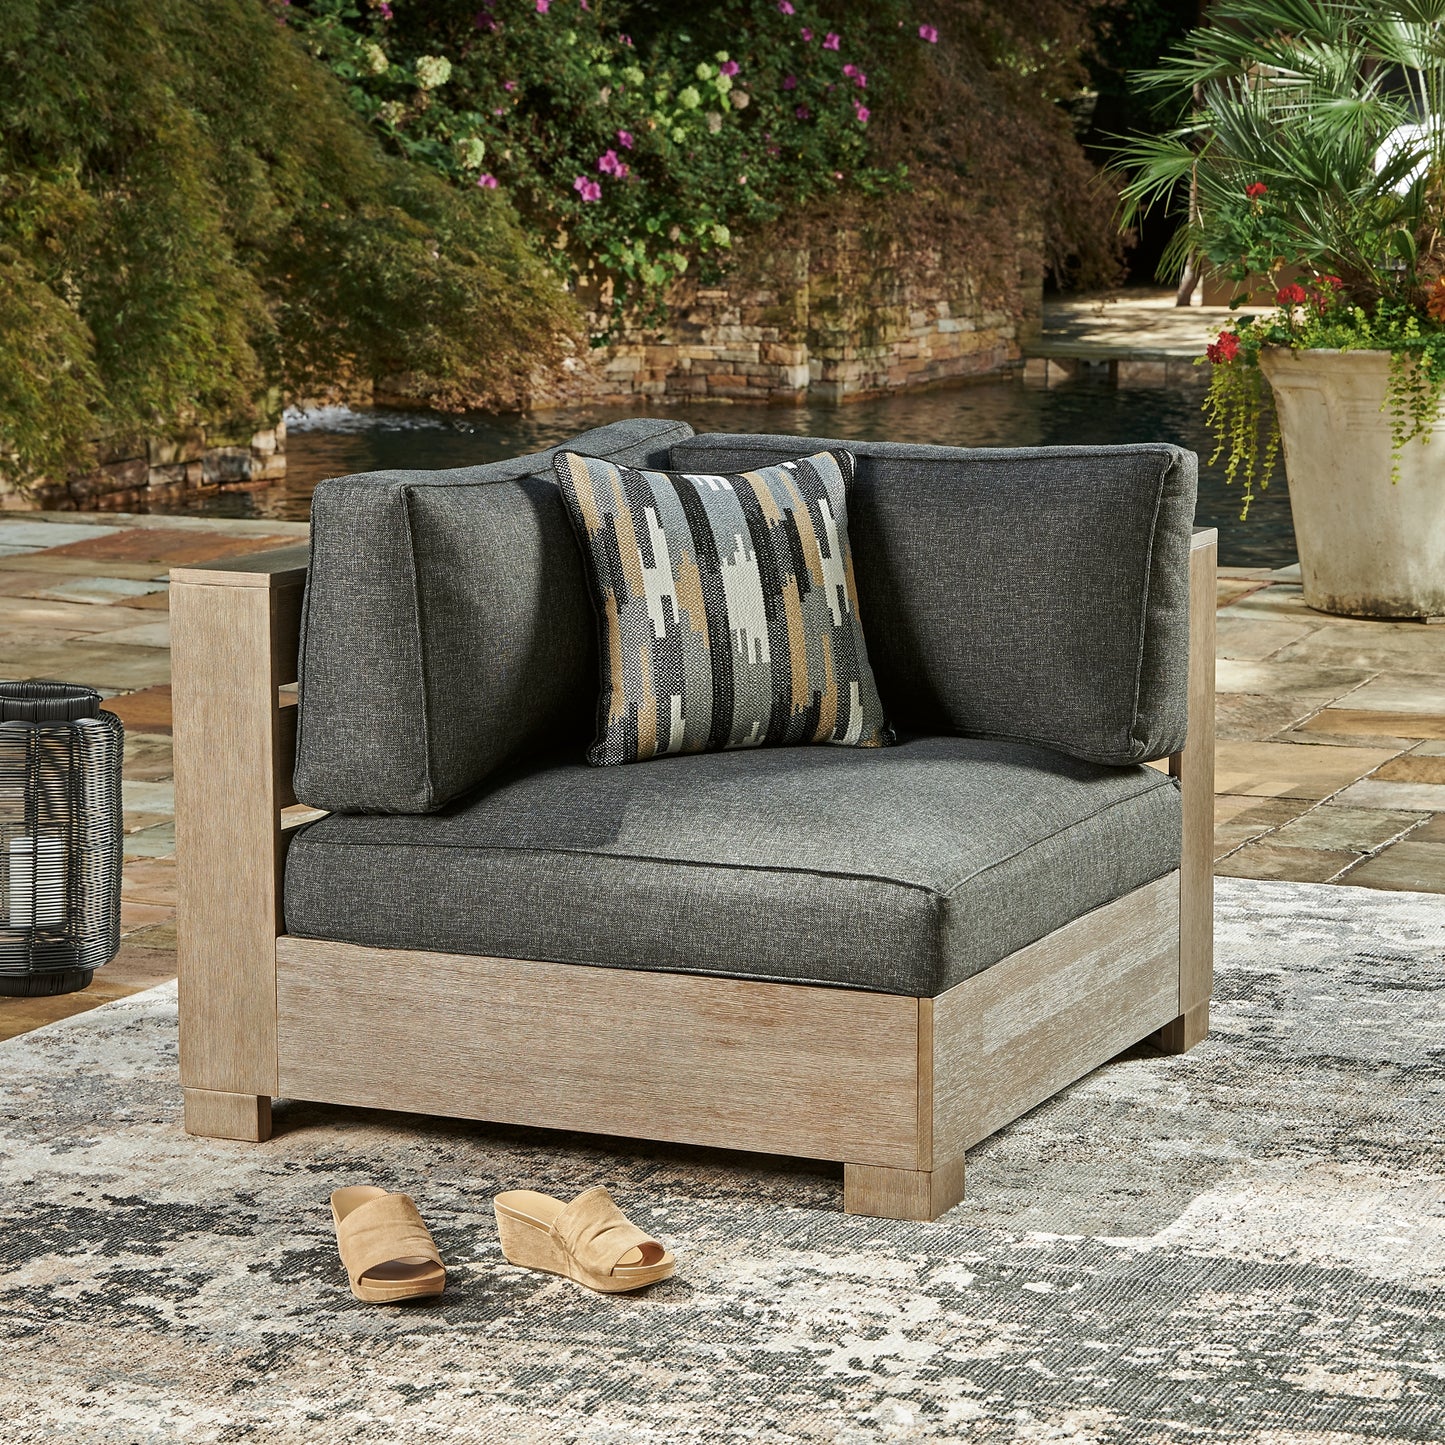 Citrine Park 5-Piece Outdoor Sectional with Ottoman JB's Furniture  Home Furniture, Home Decor, Furniture Store